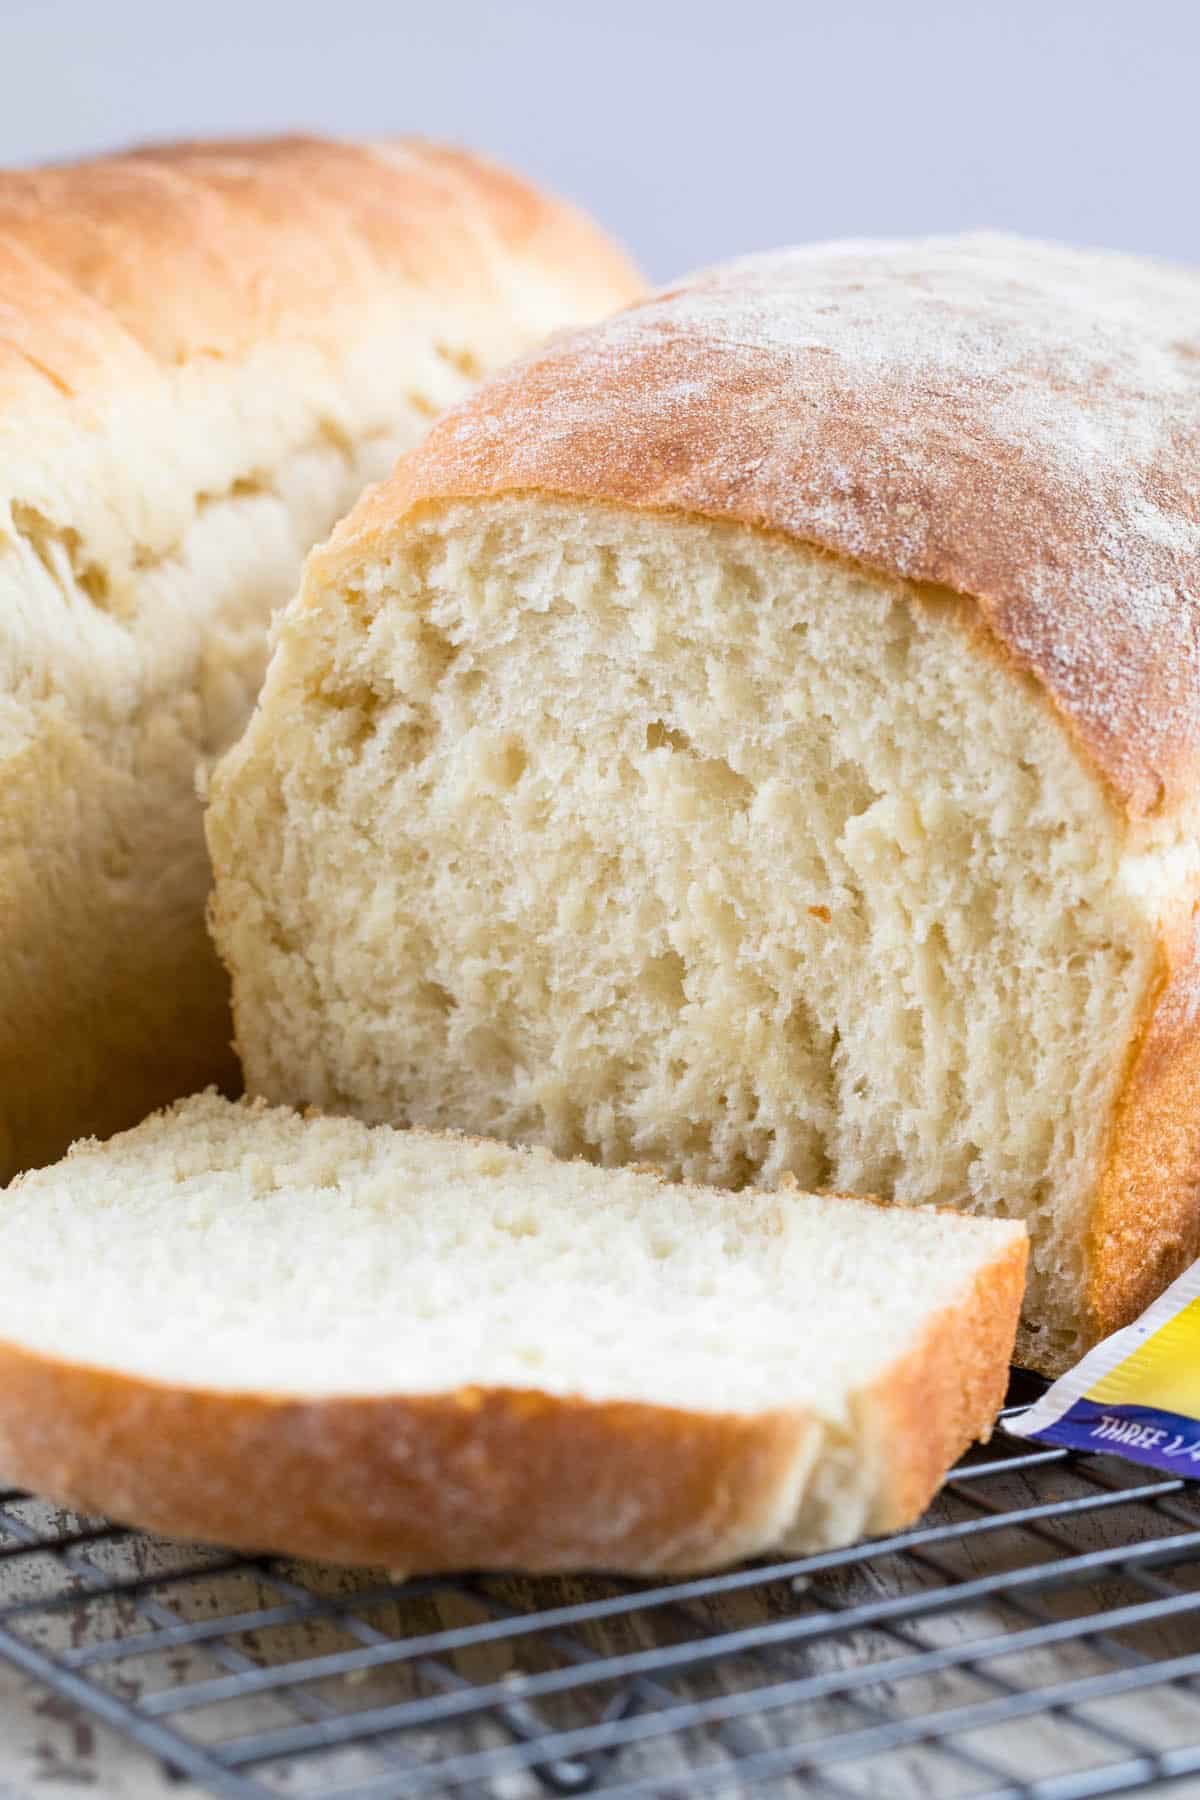 Basic Homemade Bread Recipe: How to Make It